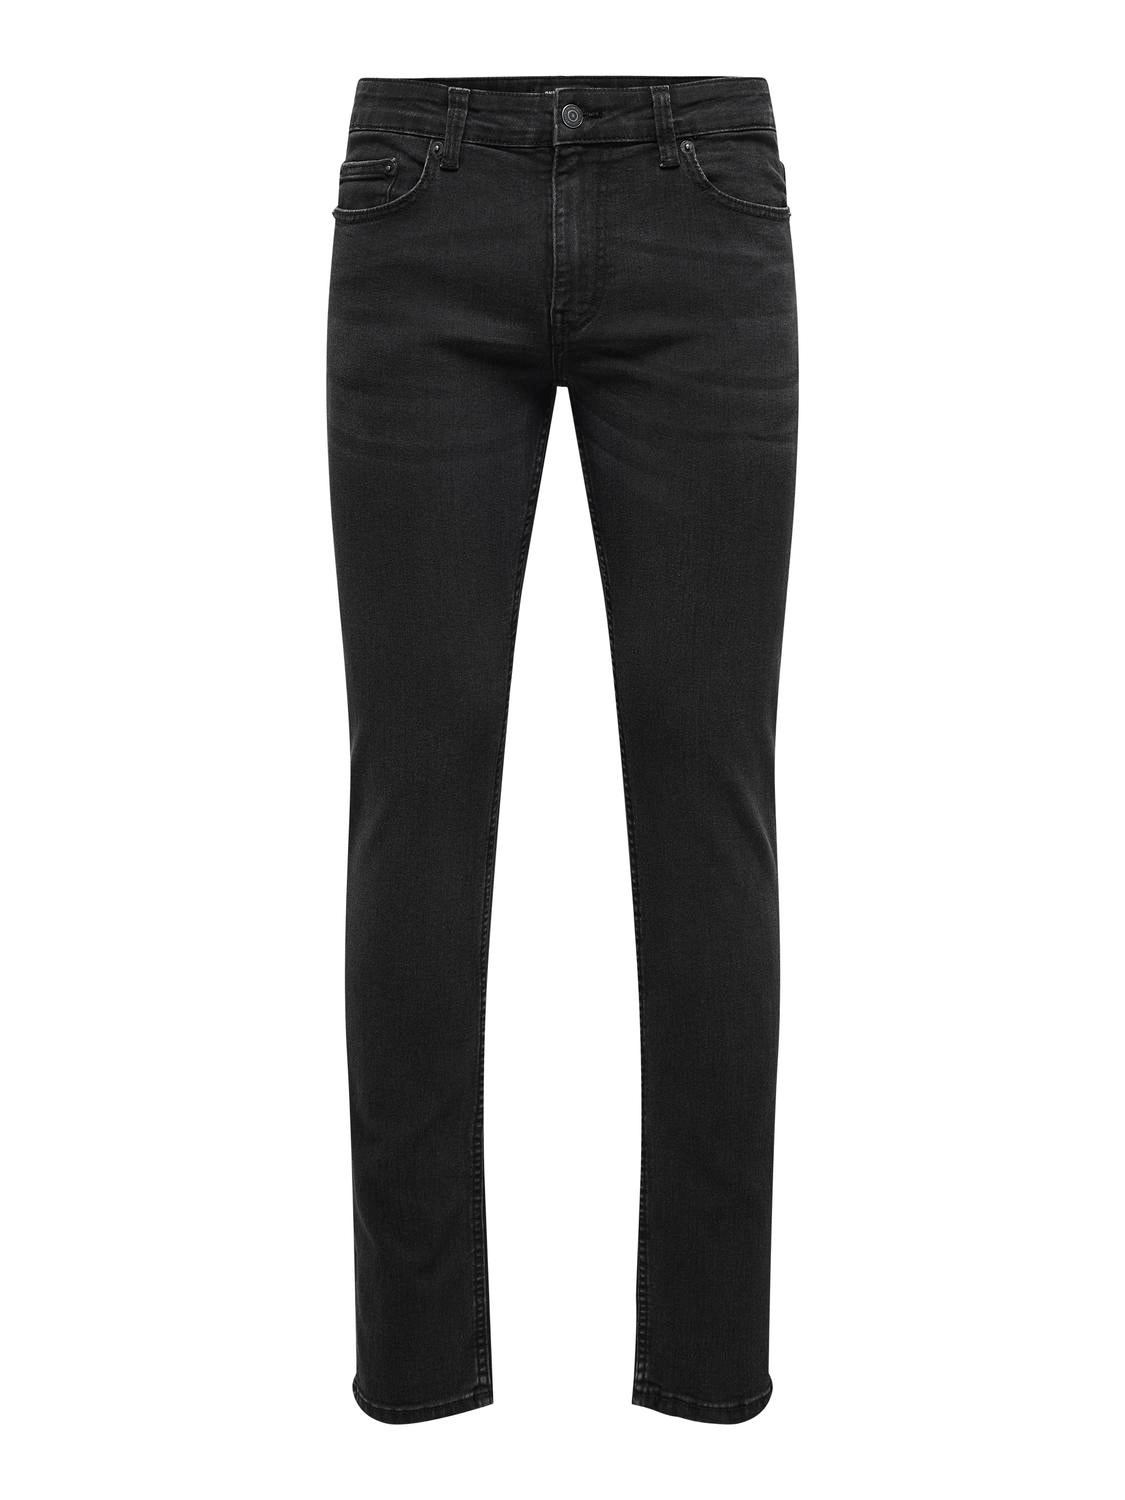 ONLY & SONS Slim Fit Mittlere Taille Jeans -Black Denim - 22027841